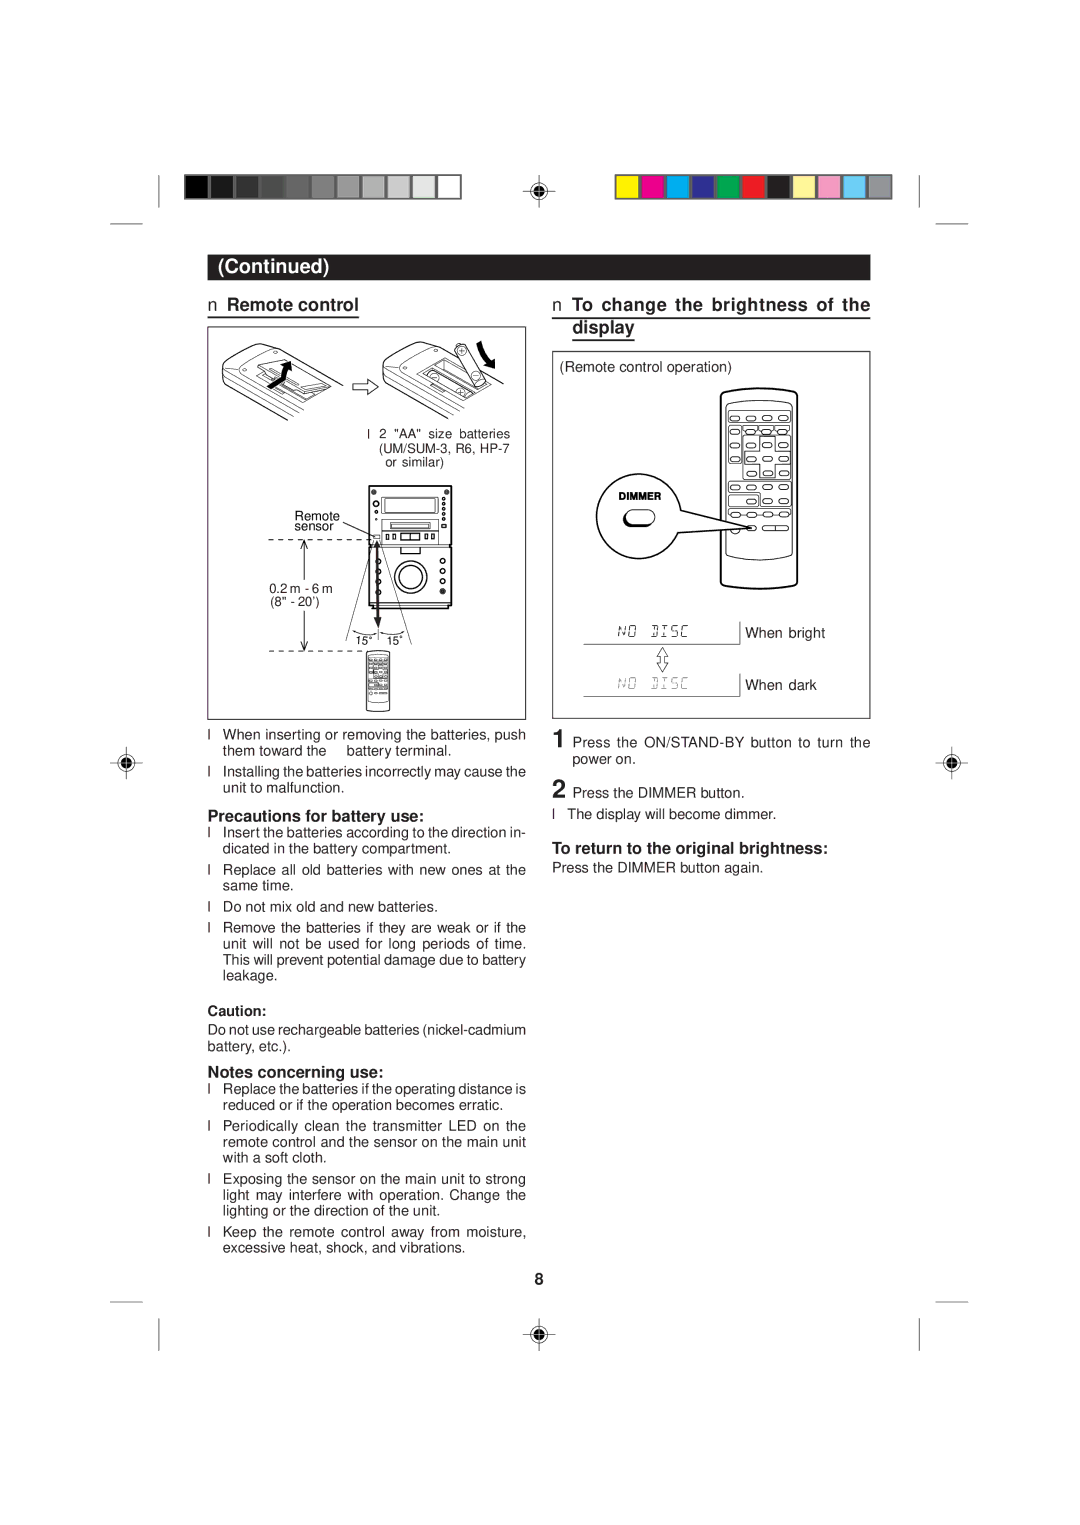 Sharp MD-M2H operation manual Remote control, To change the brightness of the display, Precautions for battery use 